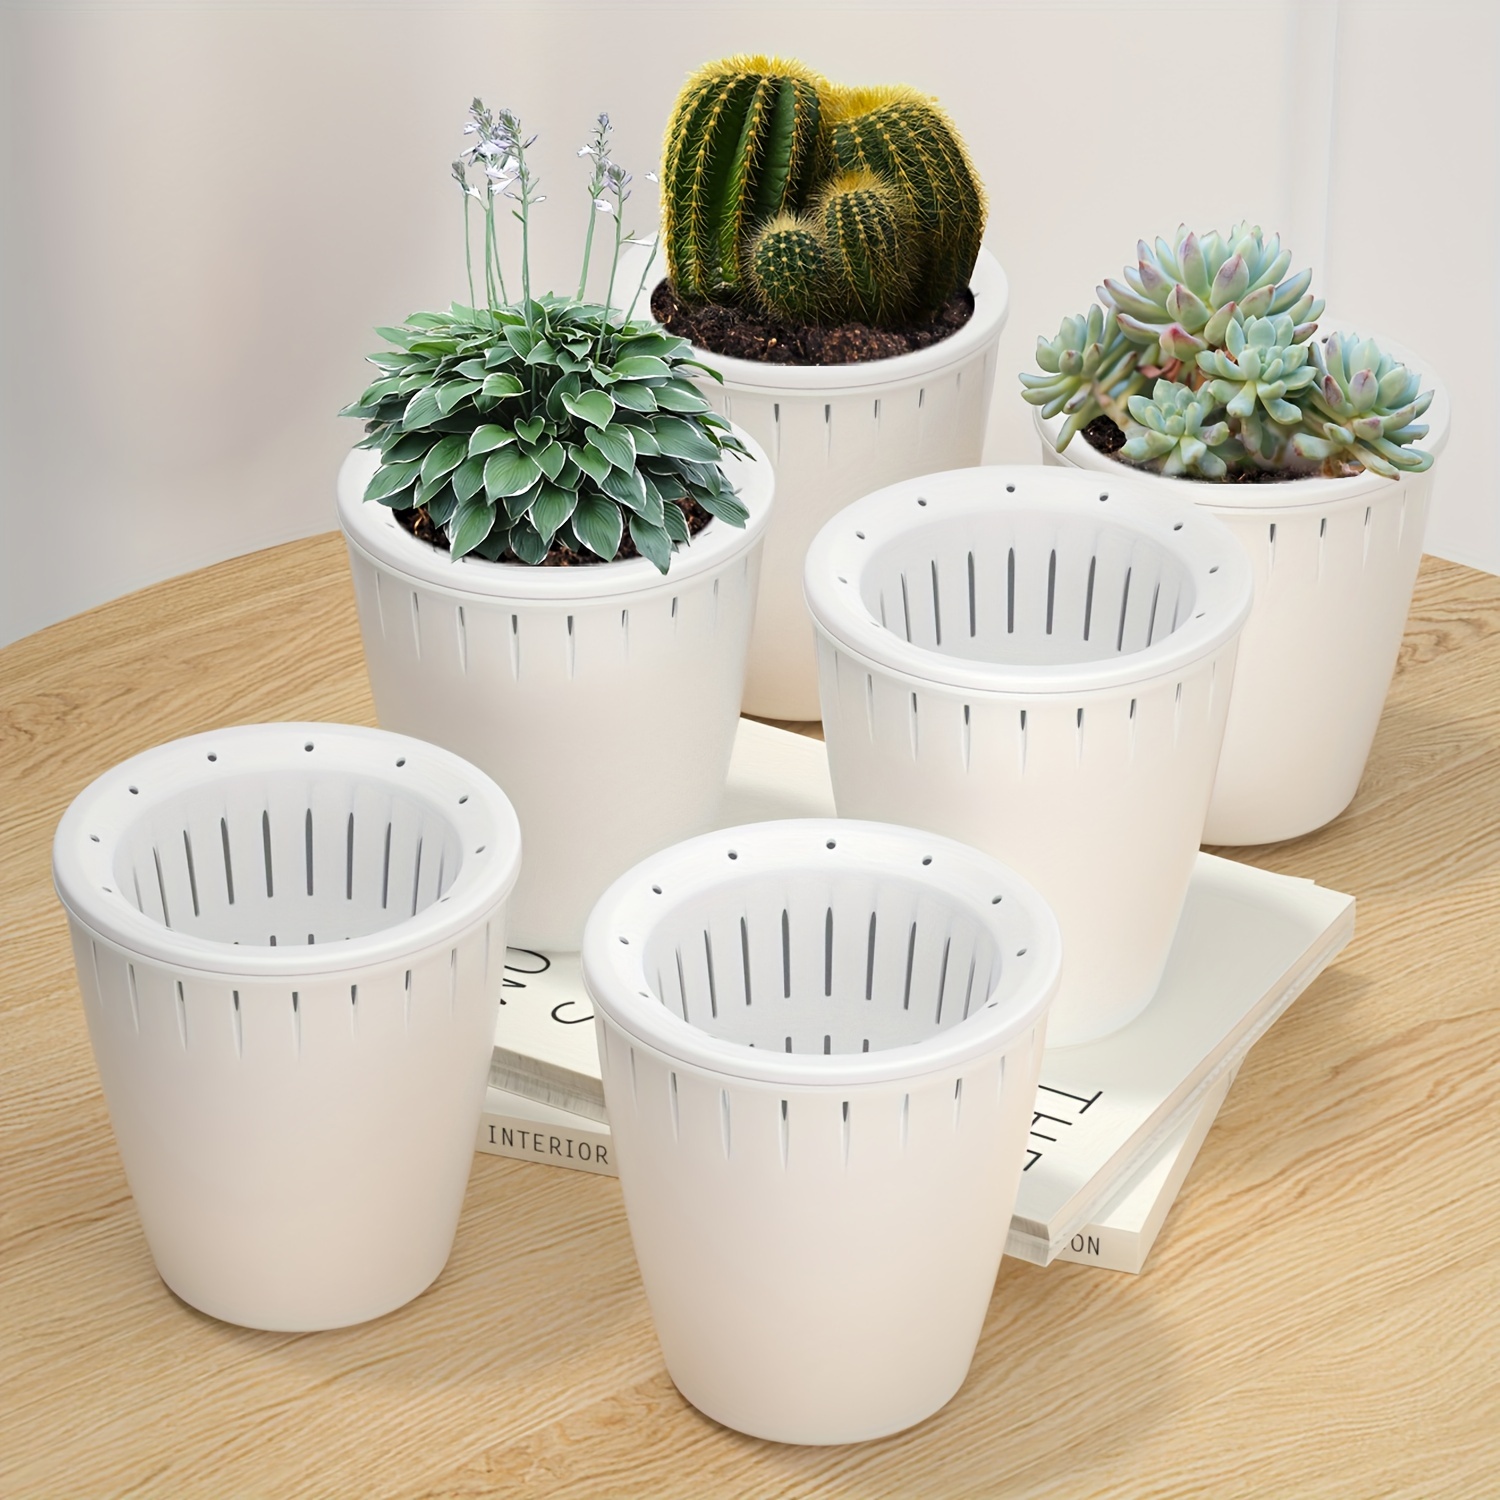 

6pcs White Self-watering Planters, 3.3 & 3.9 Inches With Tiered Water Storage Design, Modern Plastic Hydroponic Pots For Indoor Plants, Flowers & Ivy, Large Capacity - Perfect For Home Gardening